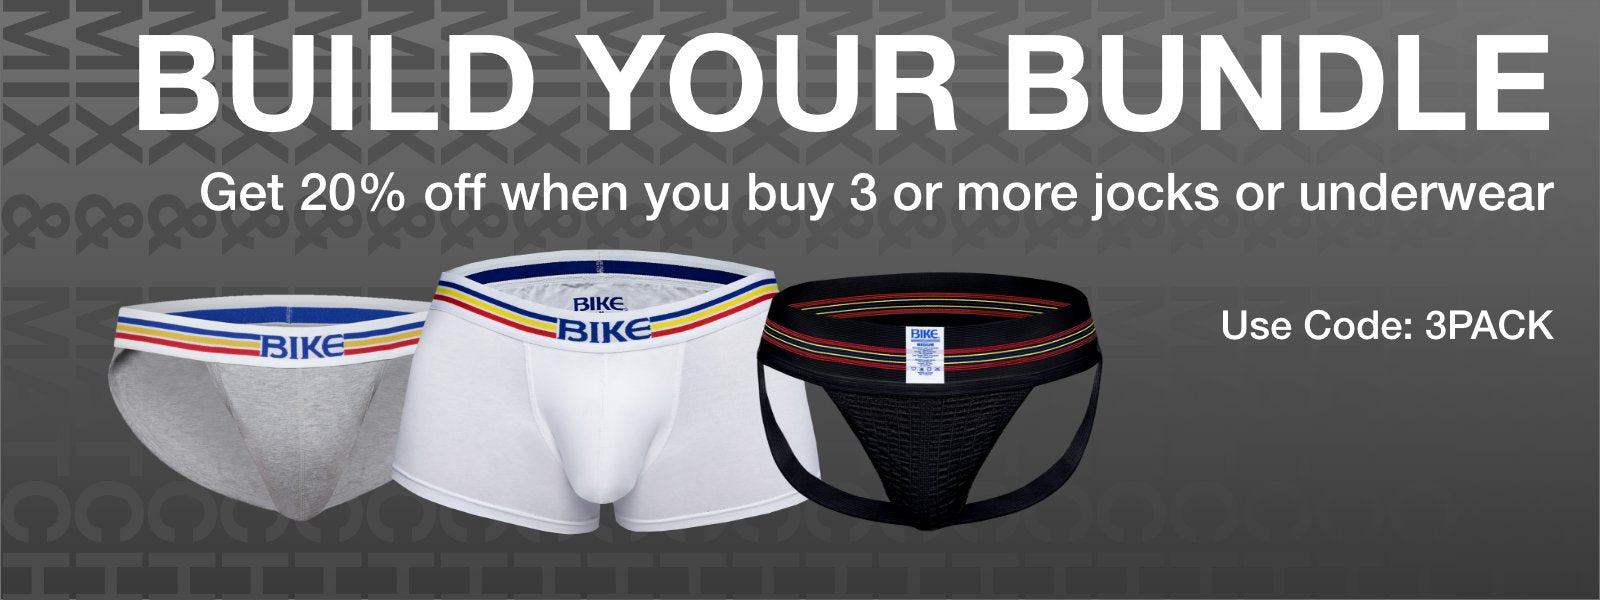 Top 10 Underwear for Men When Working Out - Ignite Cycle & Strength